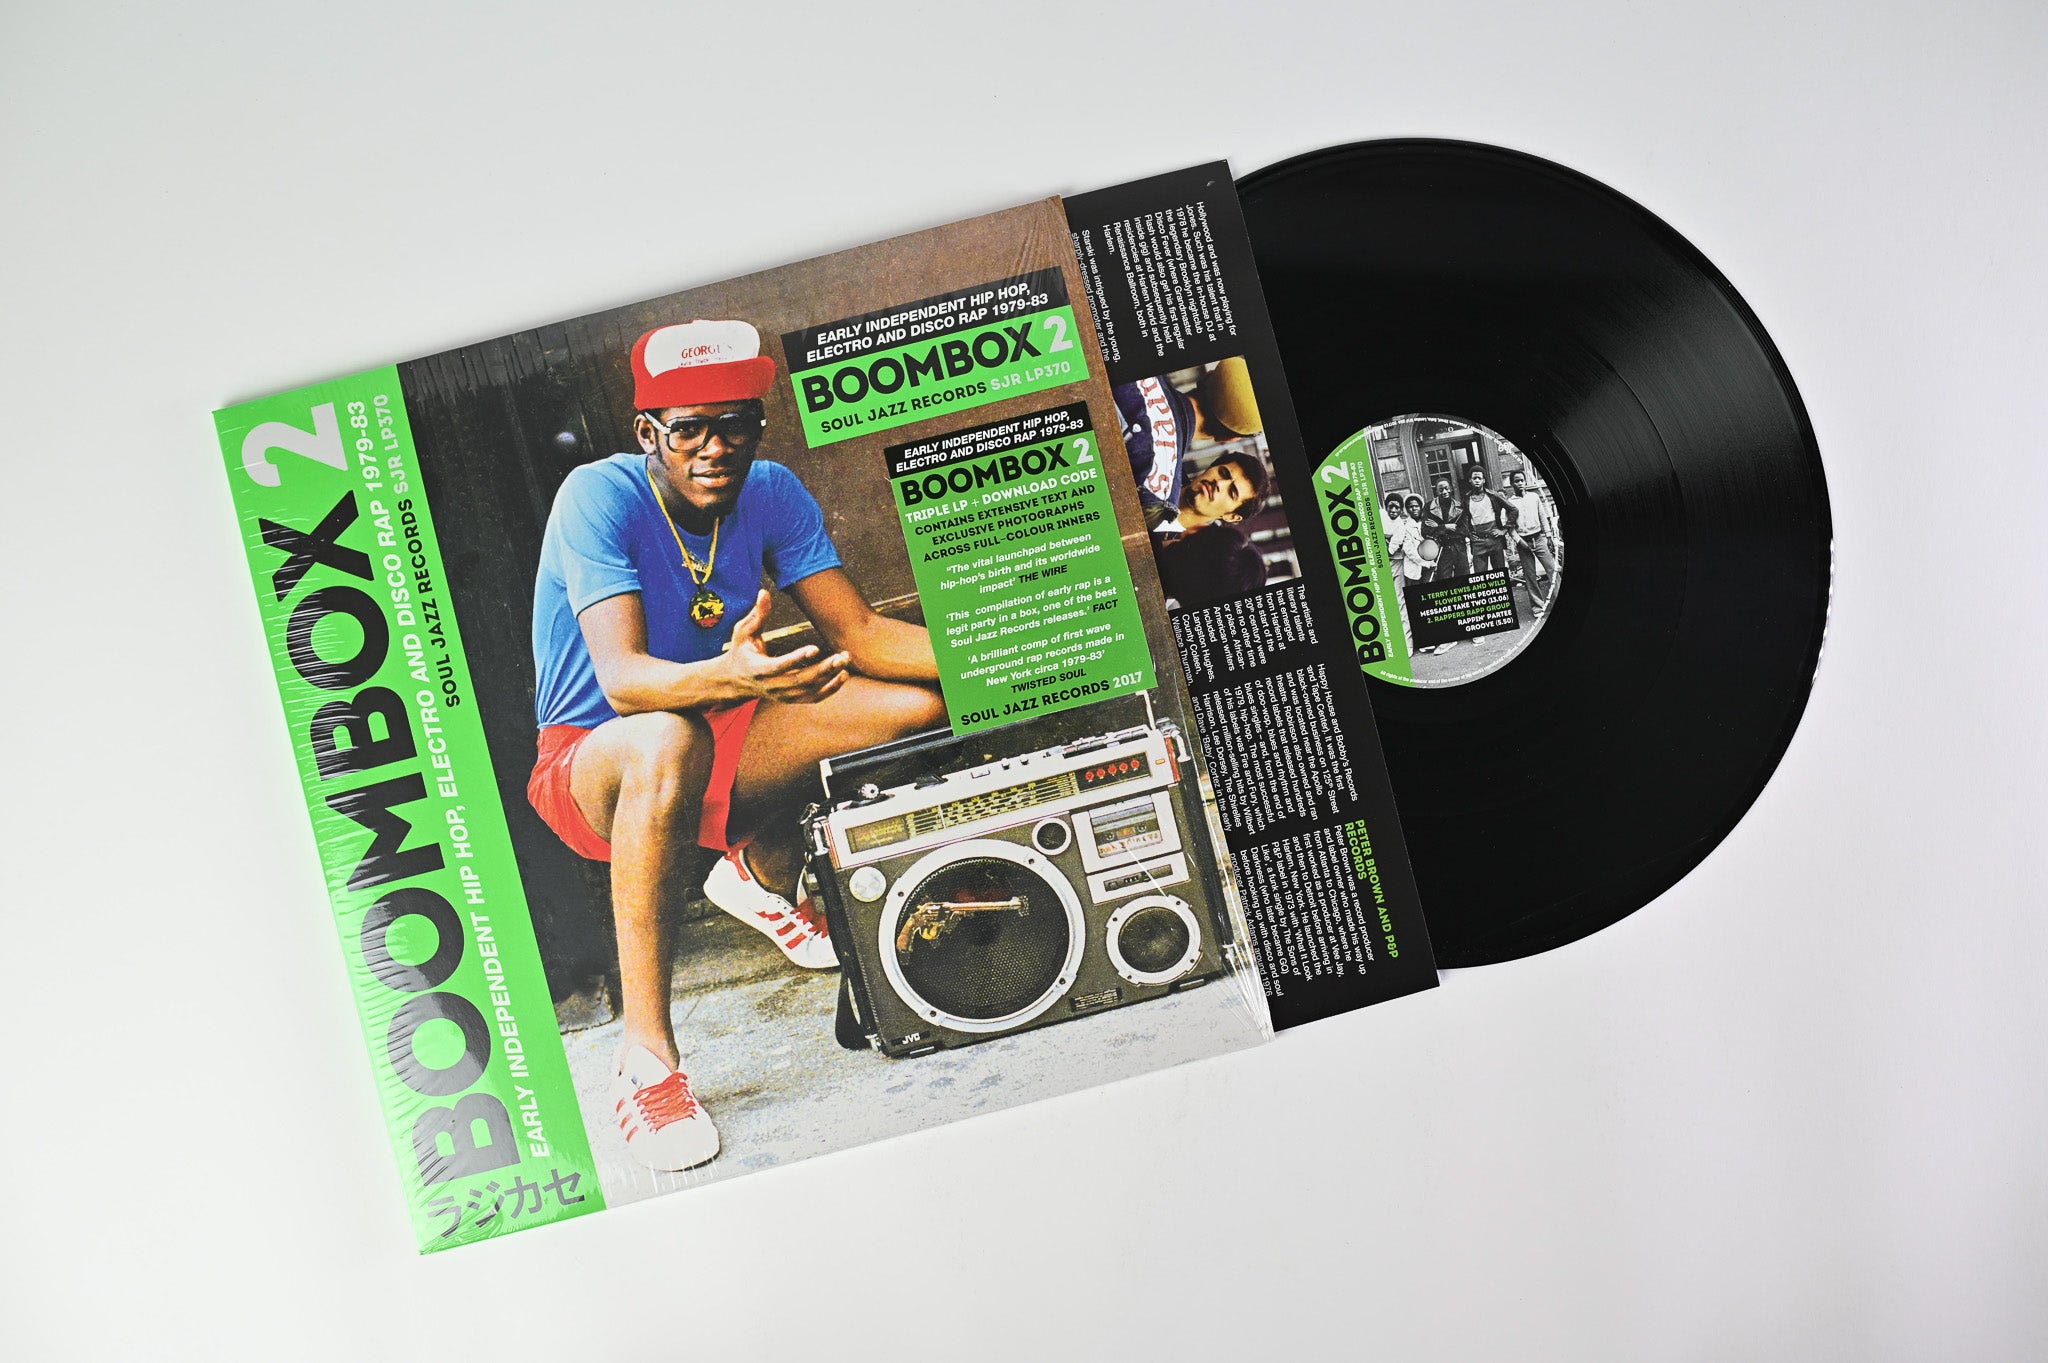 Various - Boombox 2 (Early Independent Hip Hop, Electro And Disco Rap 1979-83) on Soul Jazz Records